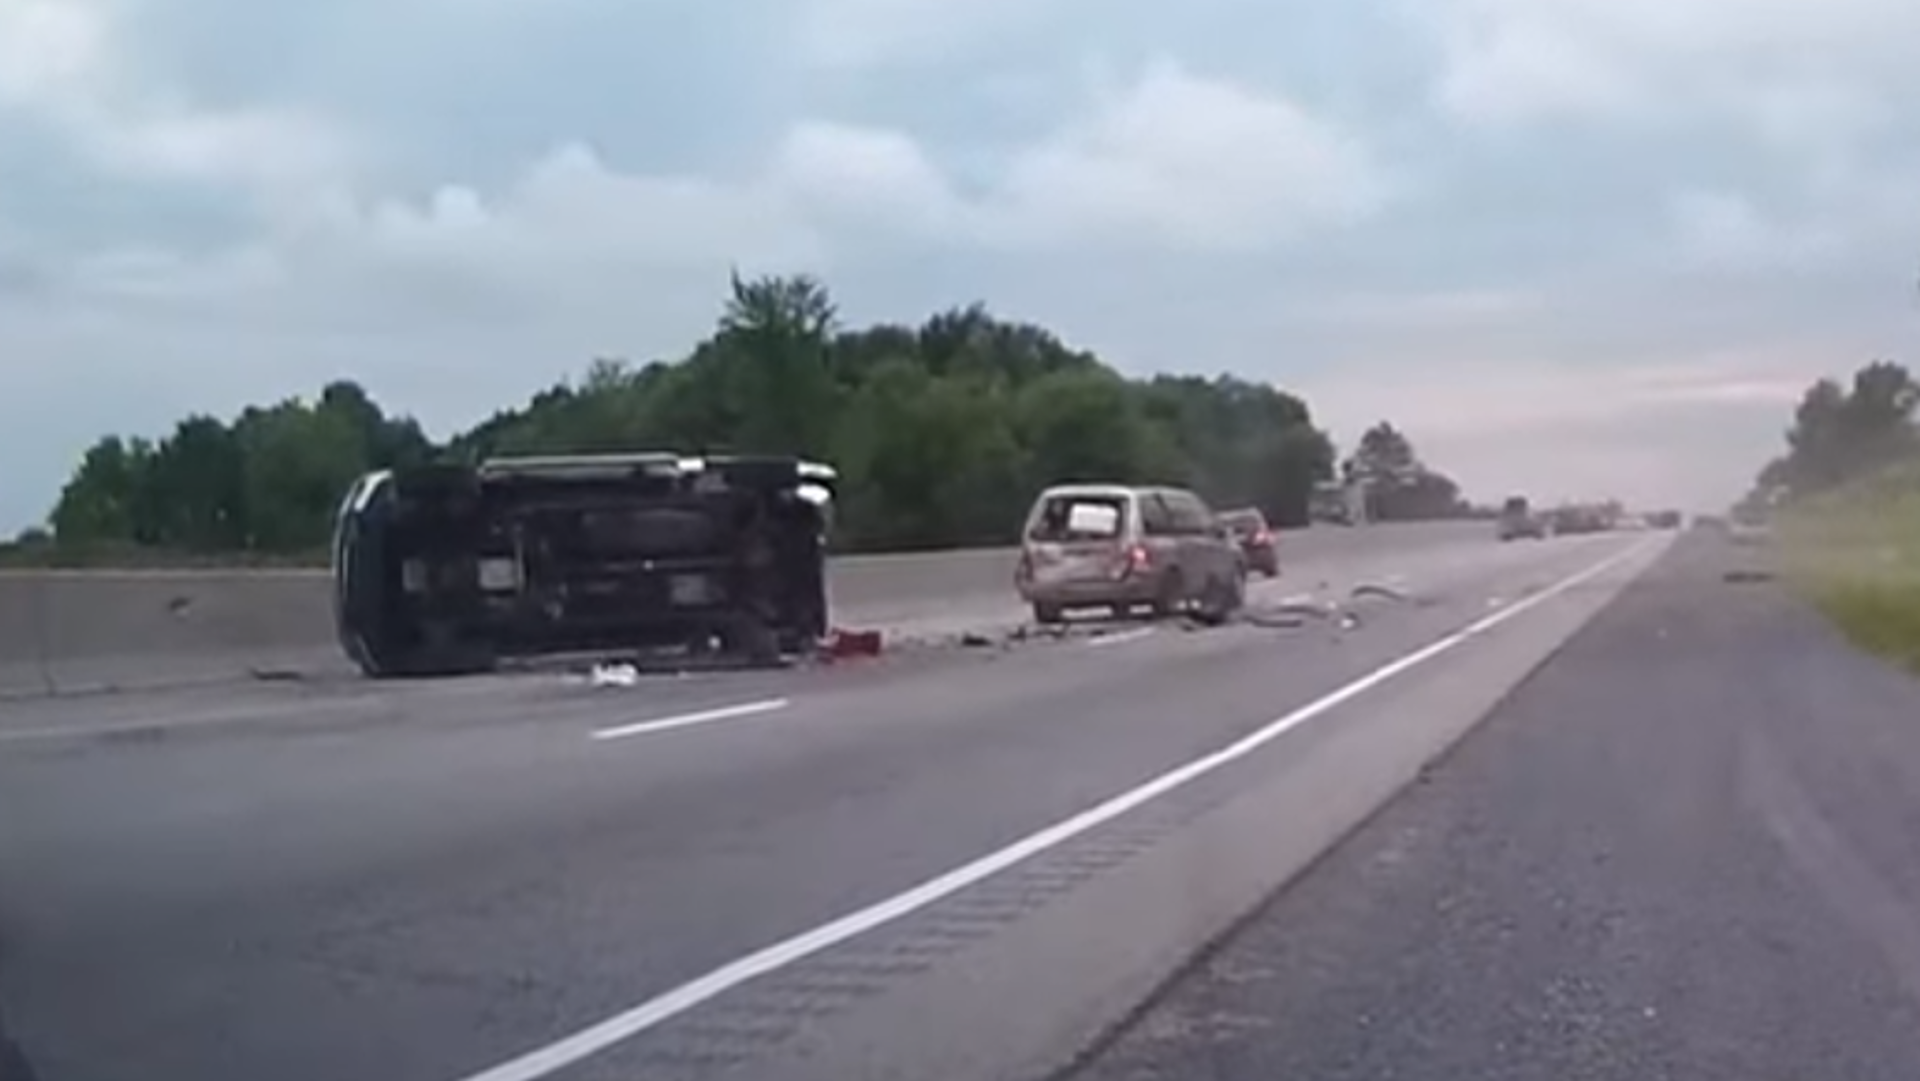 Watch an Alleged Distracted Driver Smash into Stopped Traffic on the Highway